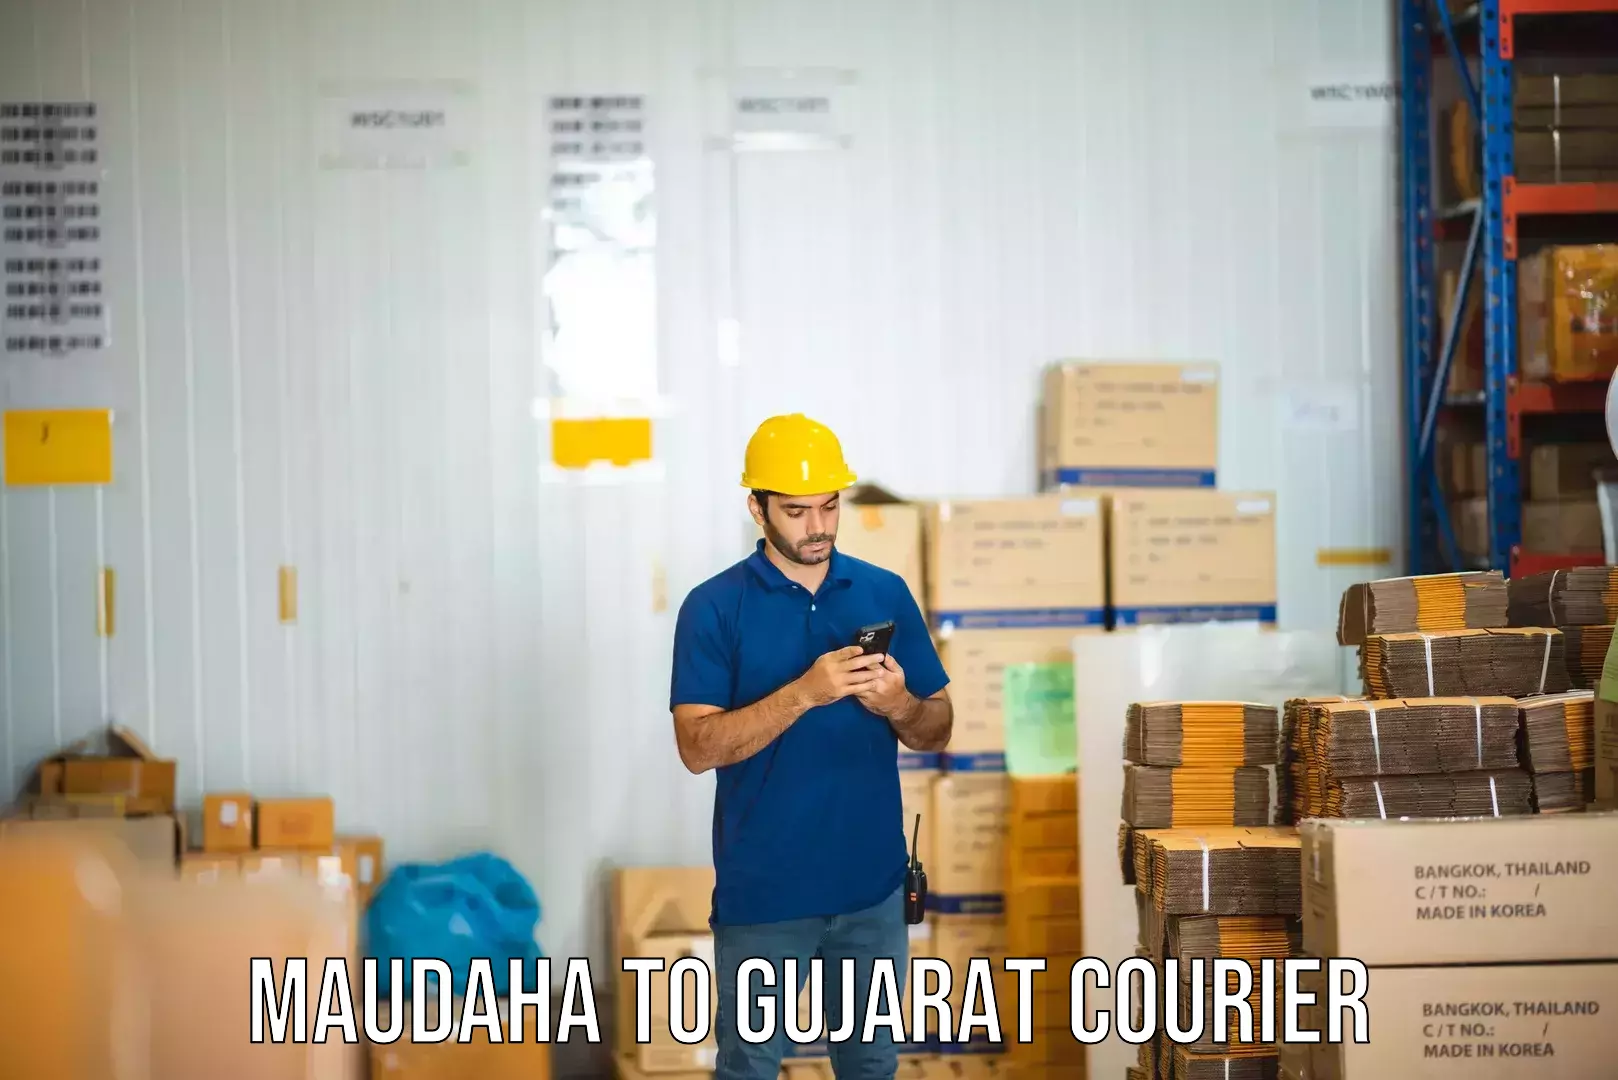 Courier service booking Maudaha to Songadh